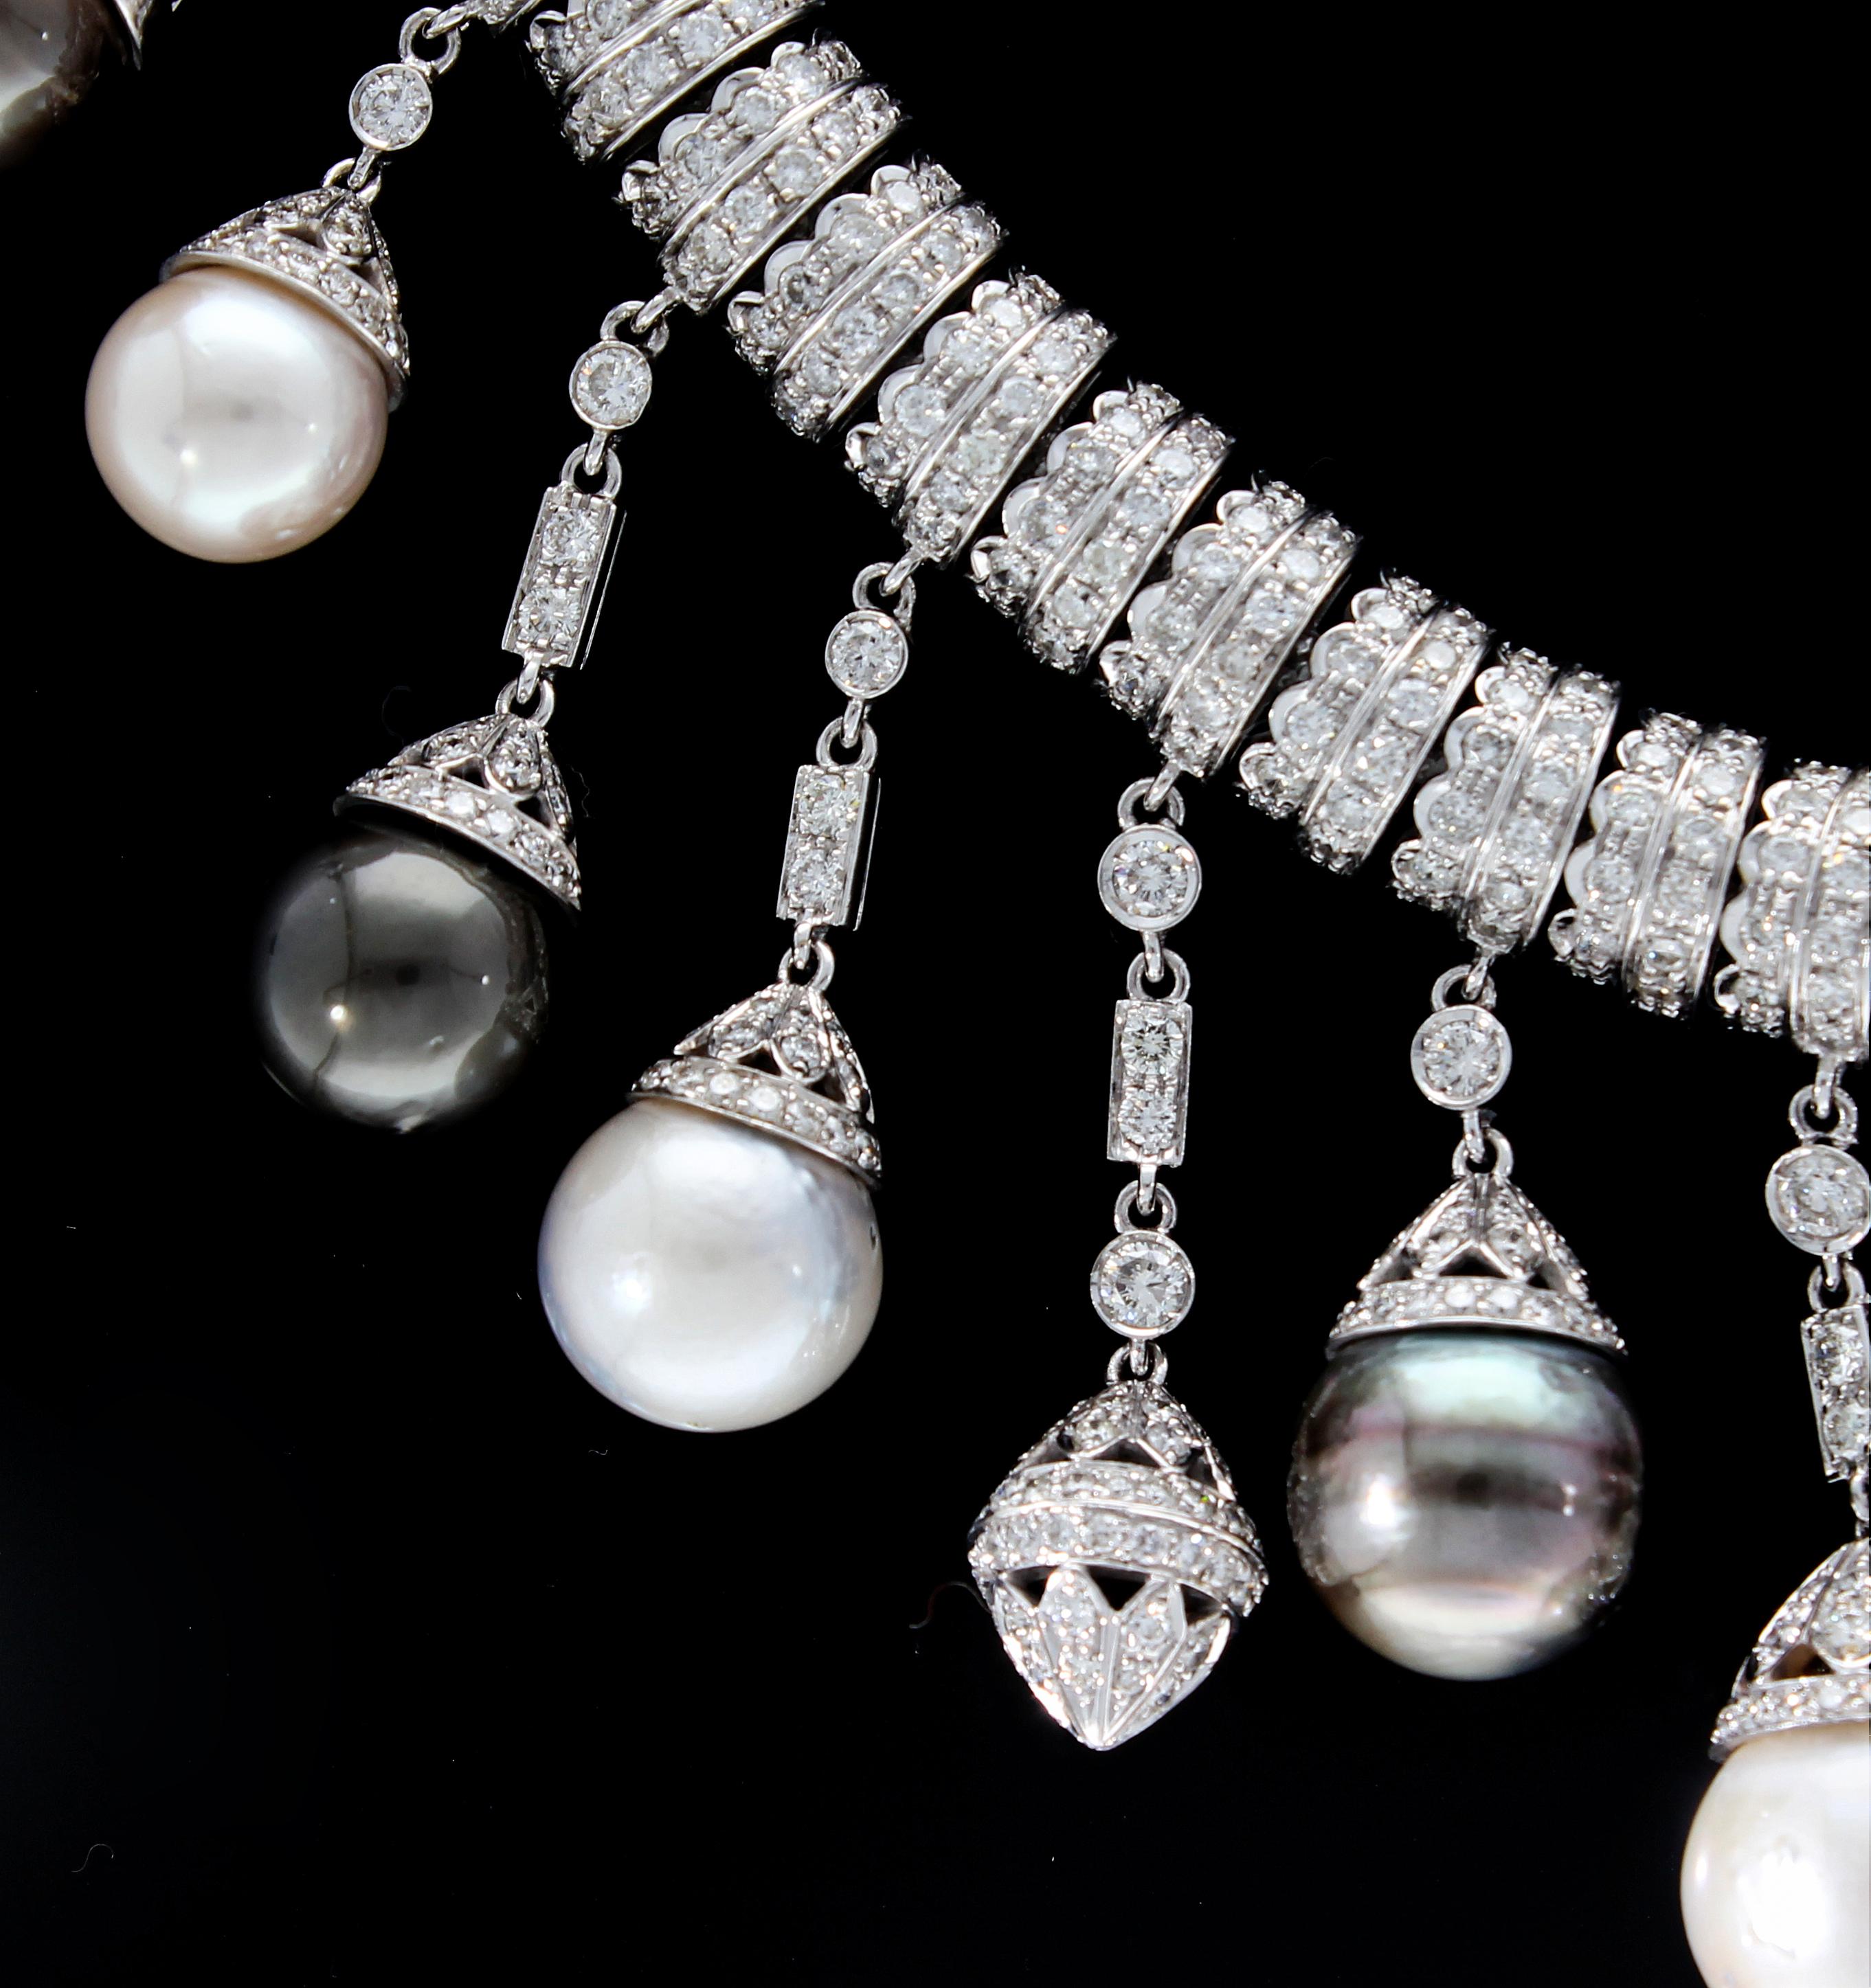 Necklace White Gold and Diamonds, Pendants with White and Black Pearls S.S. For Sale 3